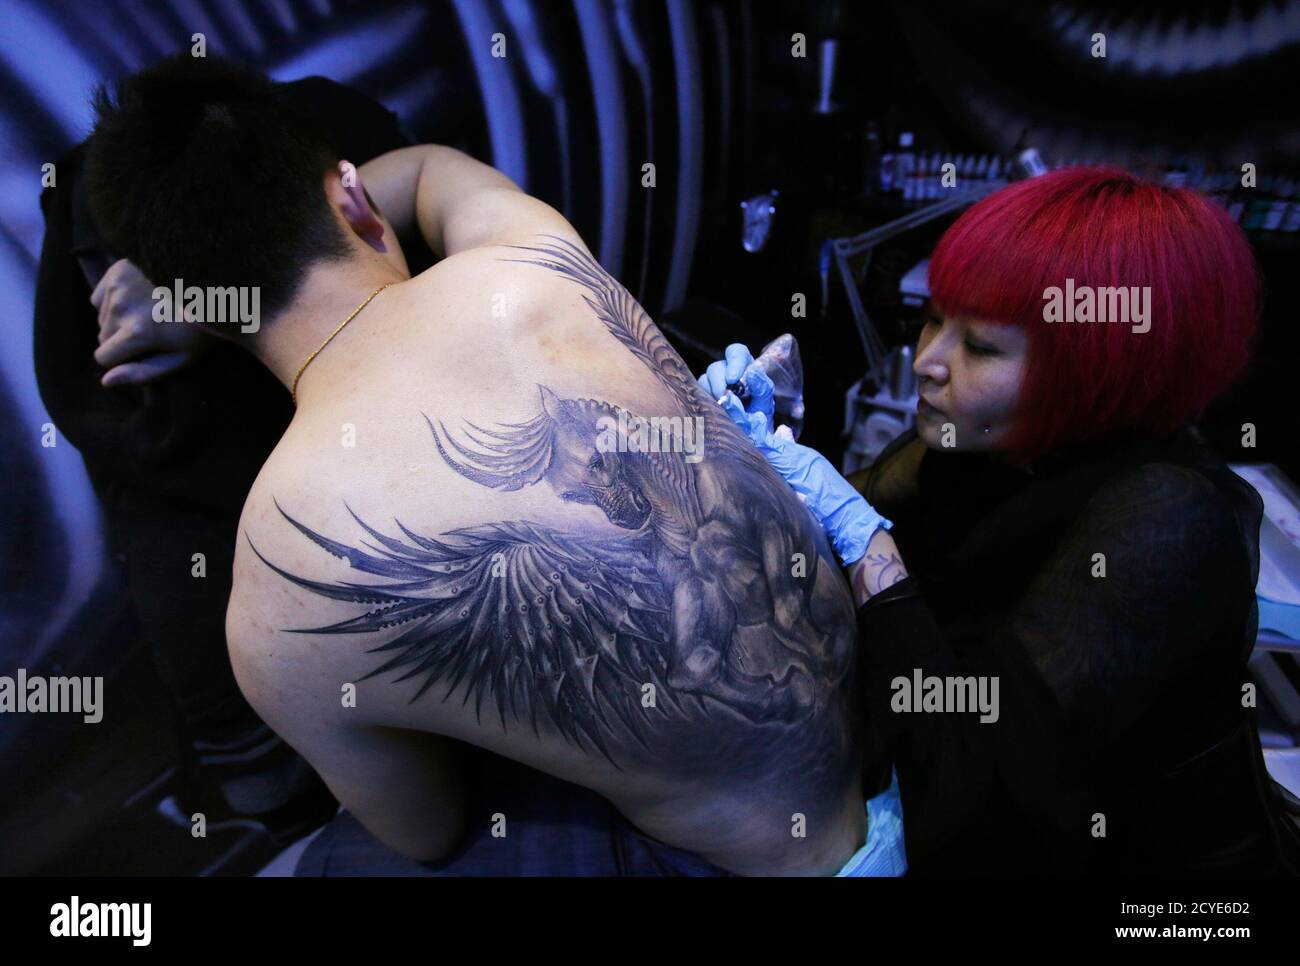 Tattoo artist Sun Lan tattoos the image of a horse with wings on the back  of her client Li Sheng at her studio ahead of the upcoming Chinese lunar  New Year in